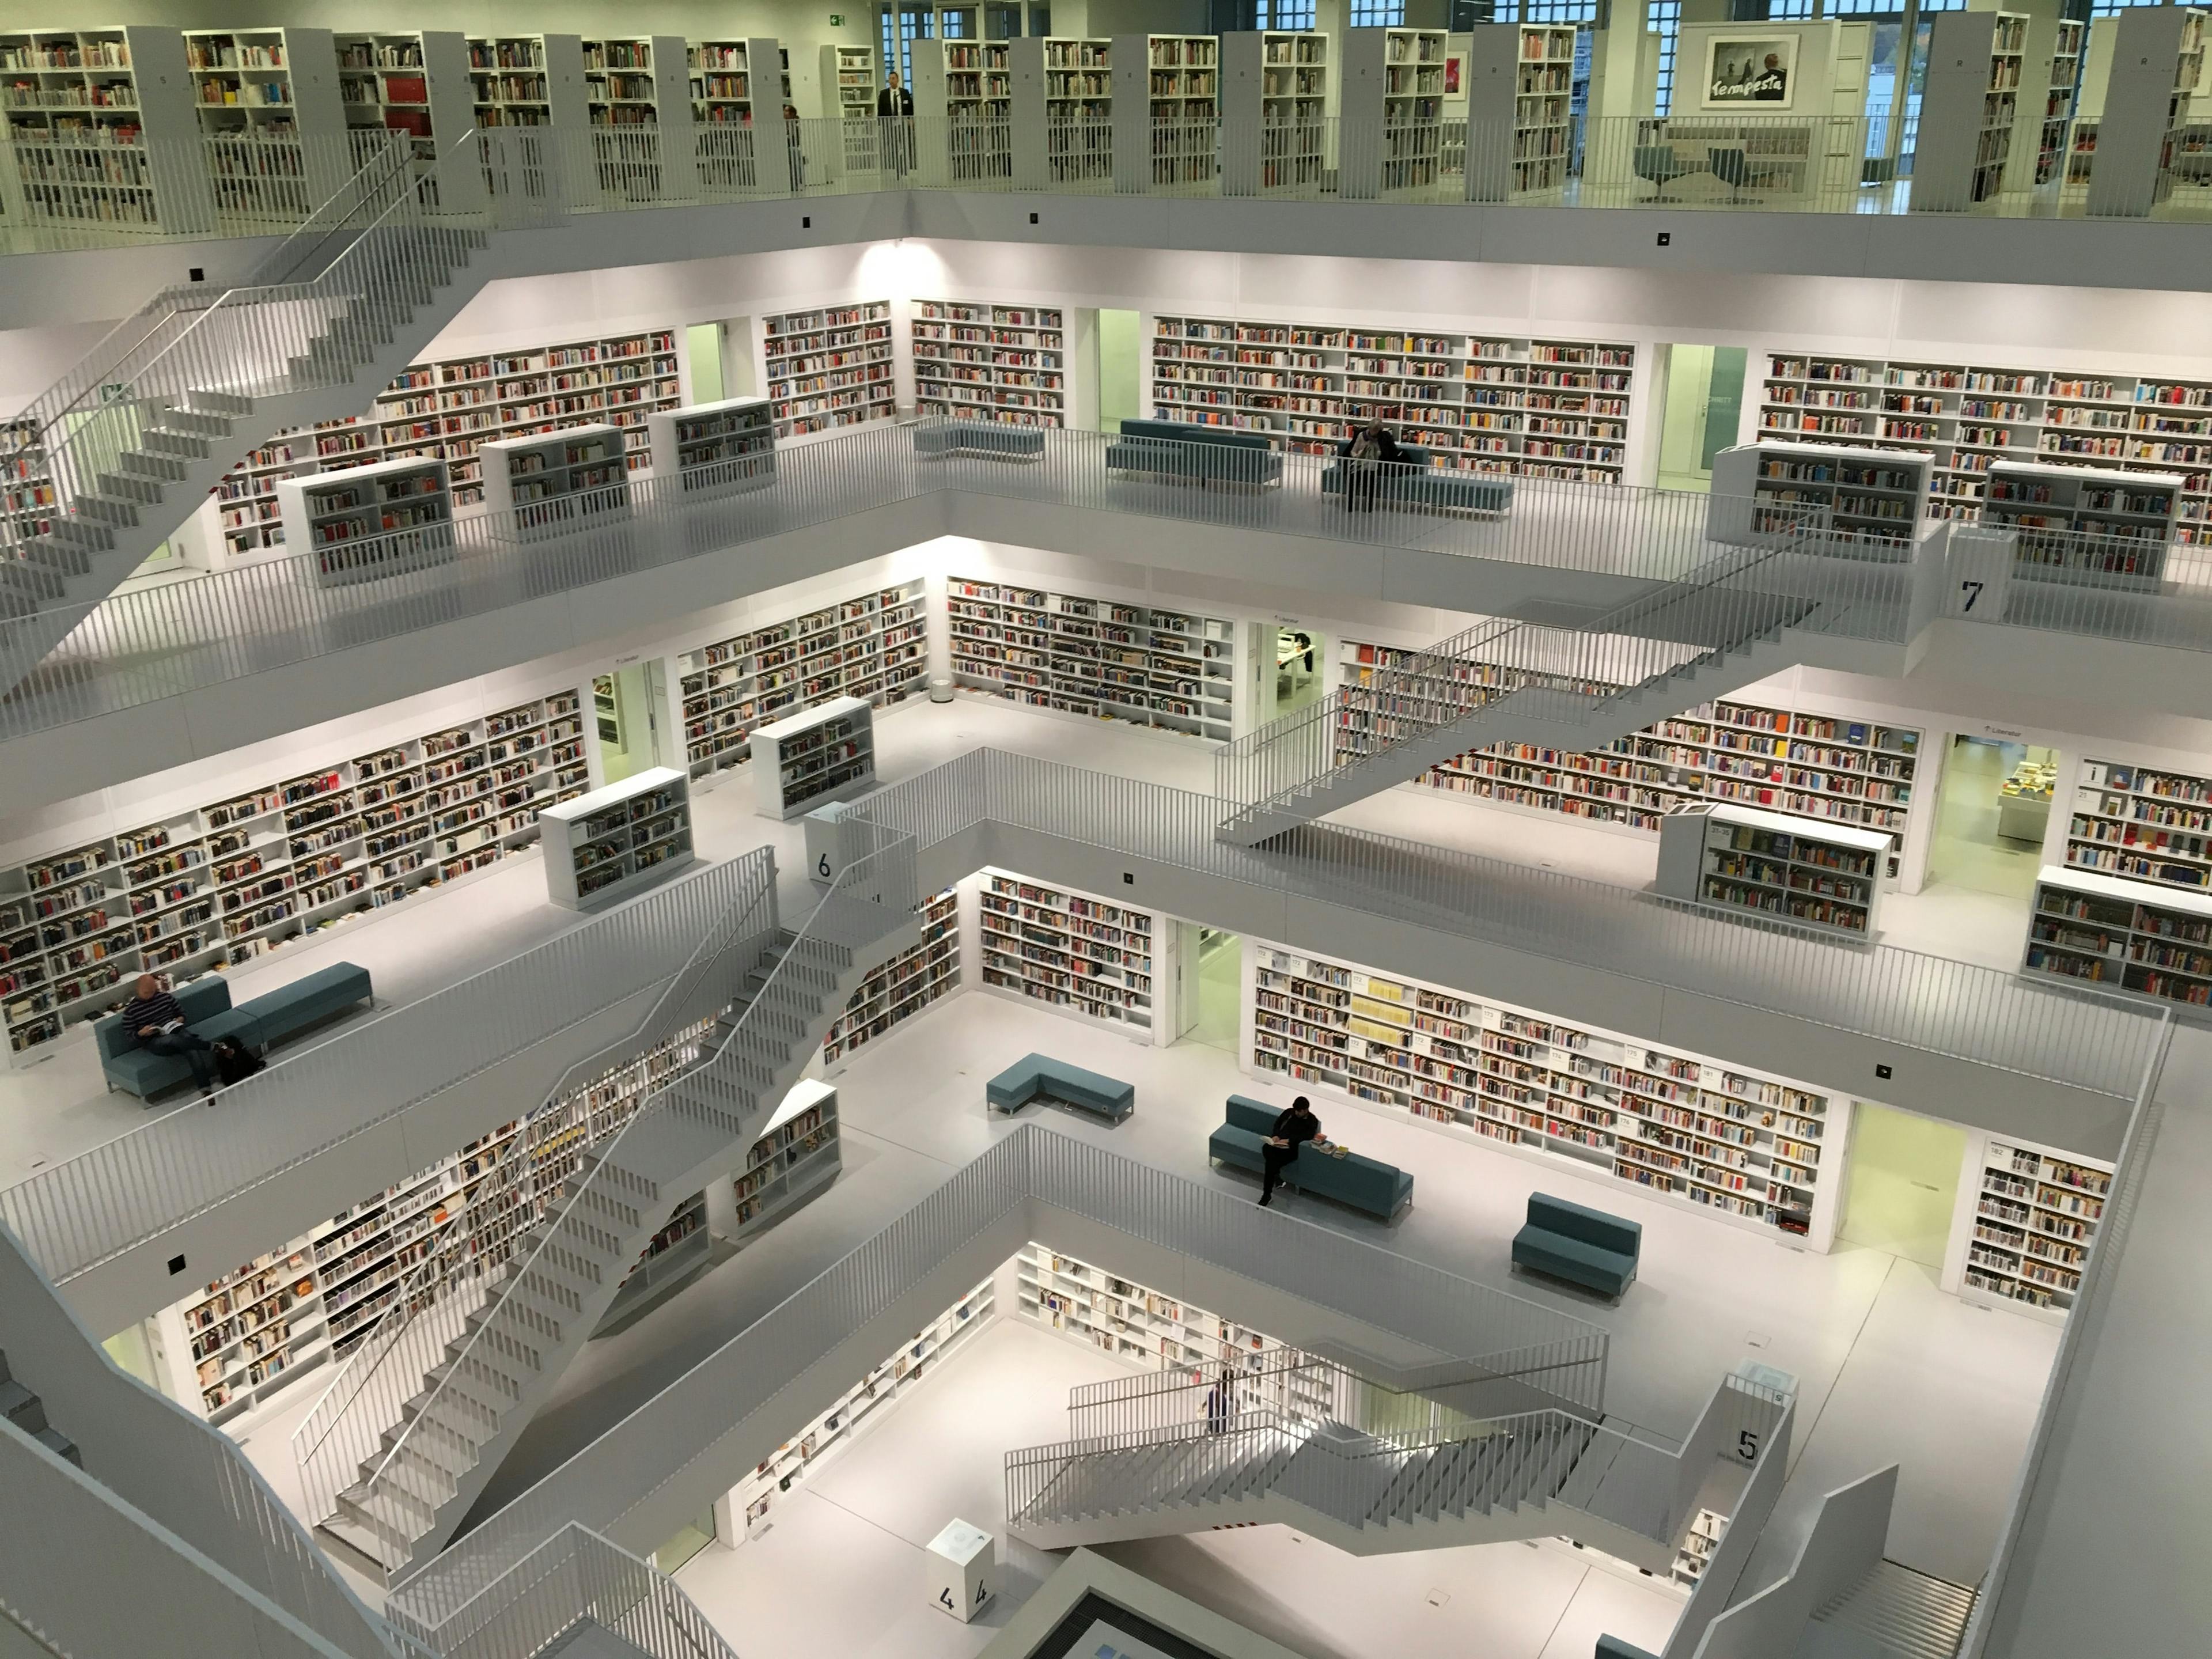 A multistory library with open modern architecture. Hundreds of books are in view.